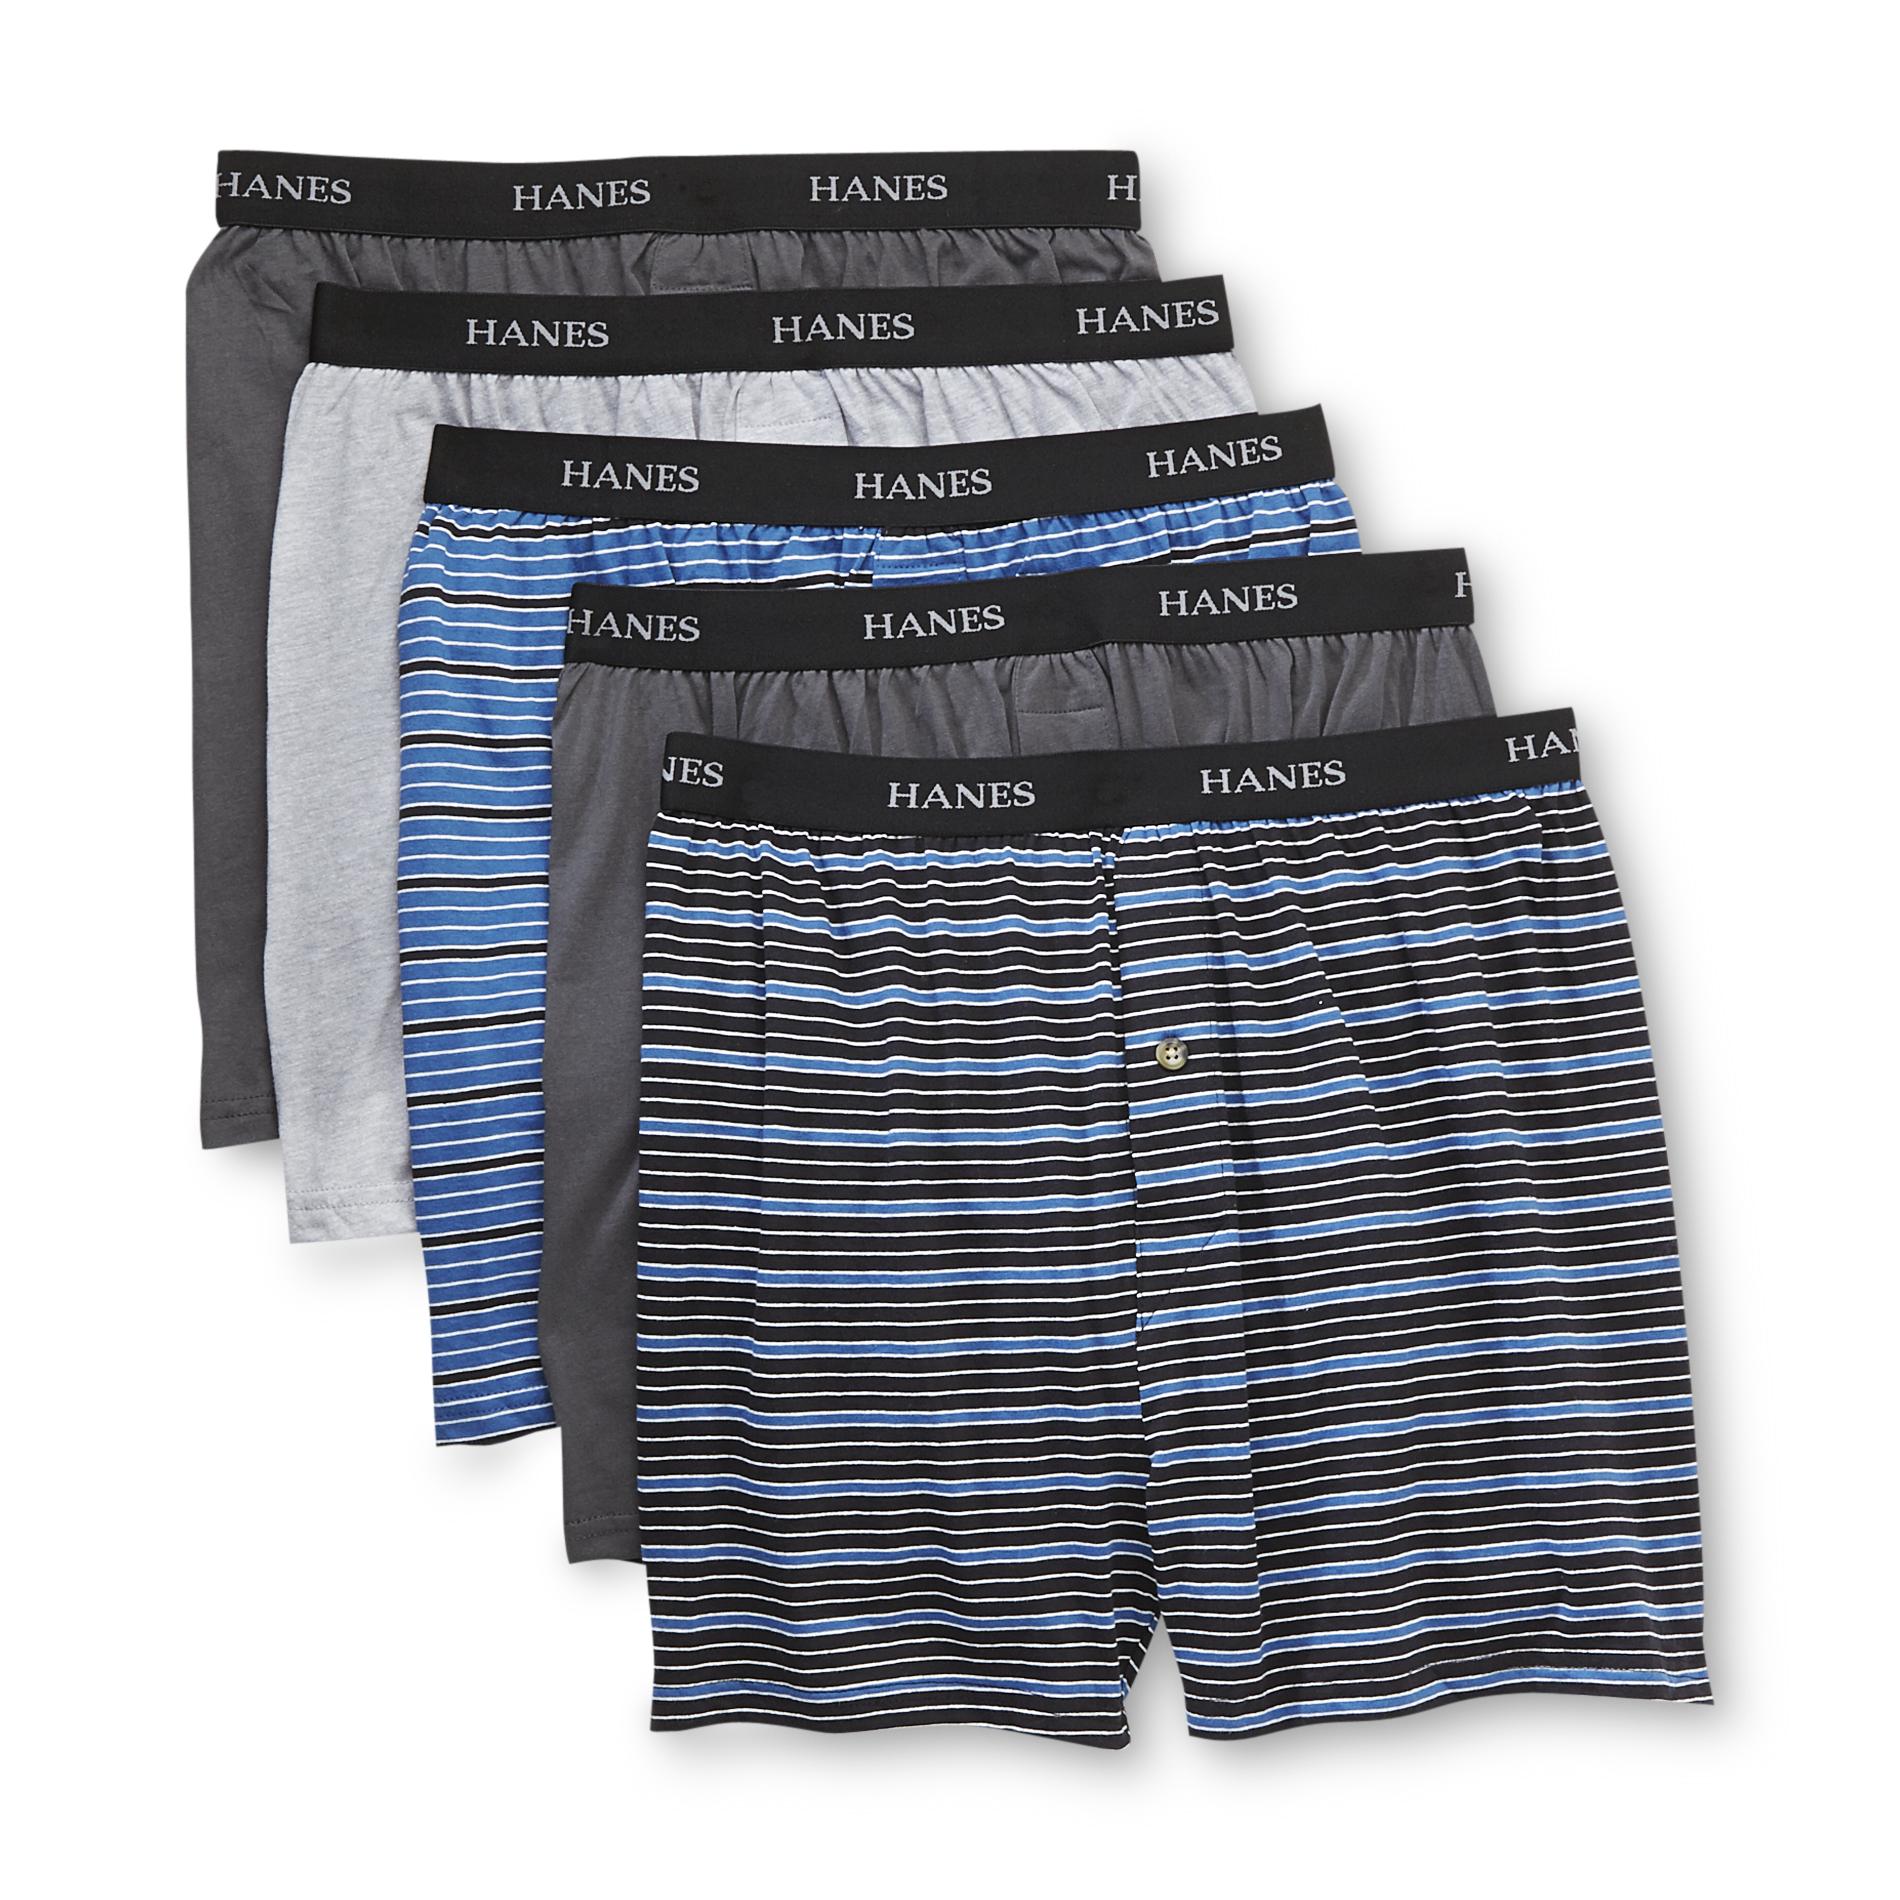 Hanes Men's 5-Pack Knit Boxer Shorts - Solid & Patterns - Assorted Colors